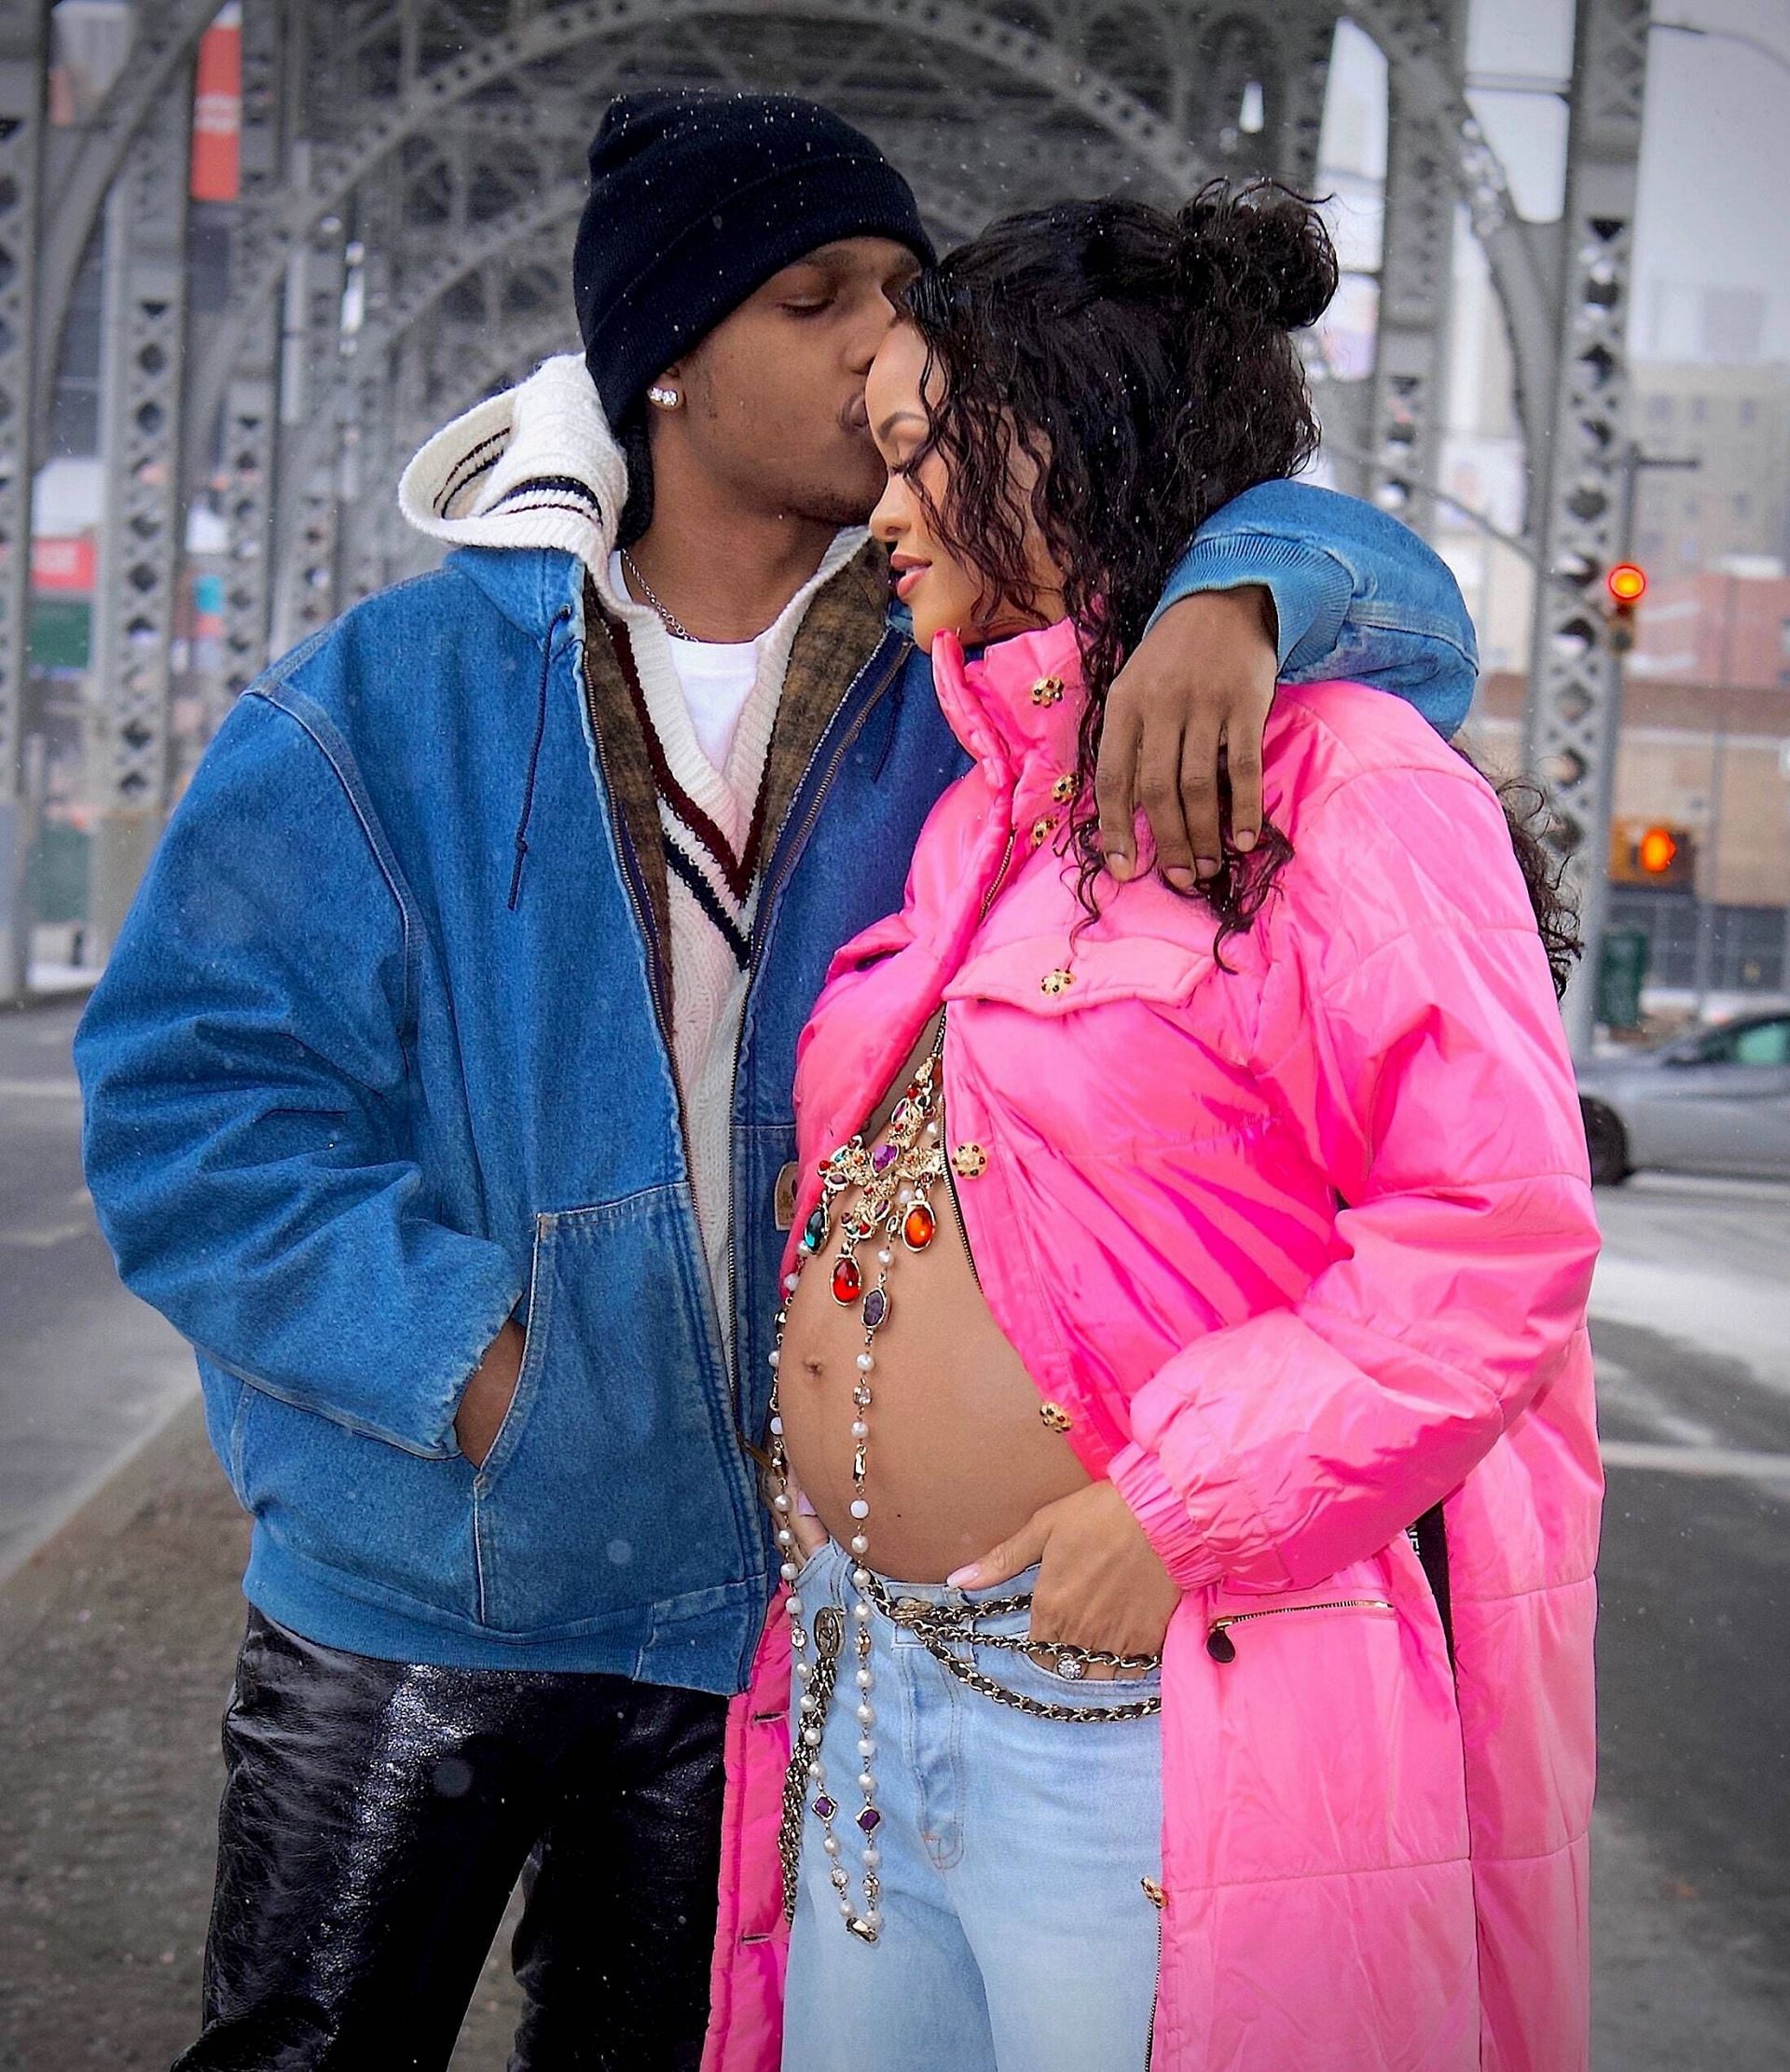 A$AP Rocky with Rihanna sporting her baby bump in New York (Image via Shutterstock)